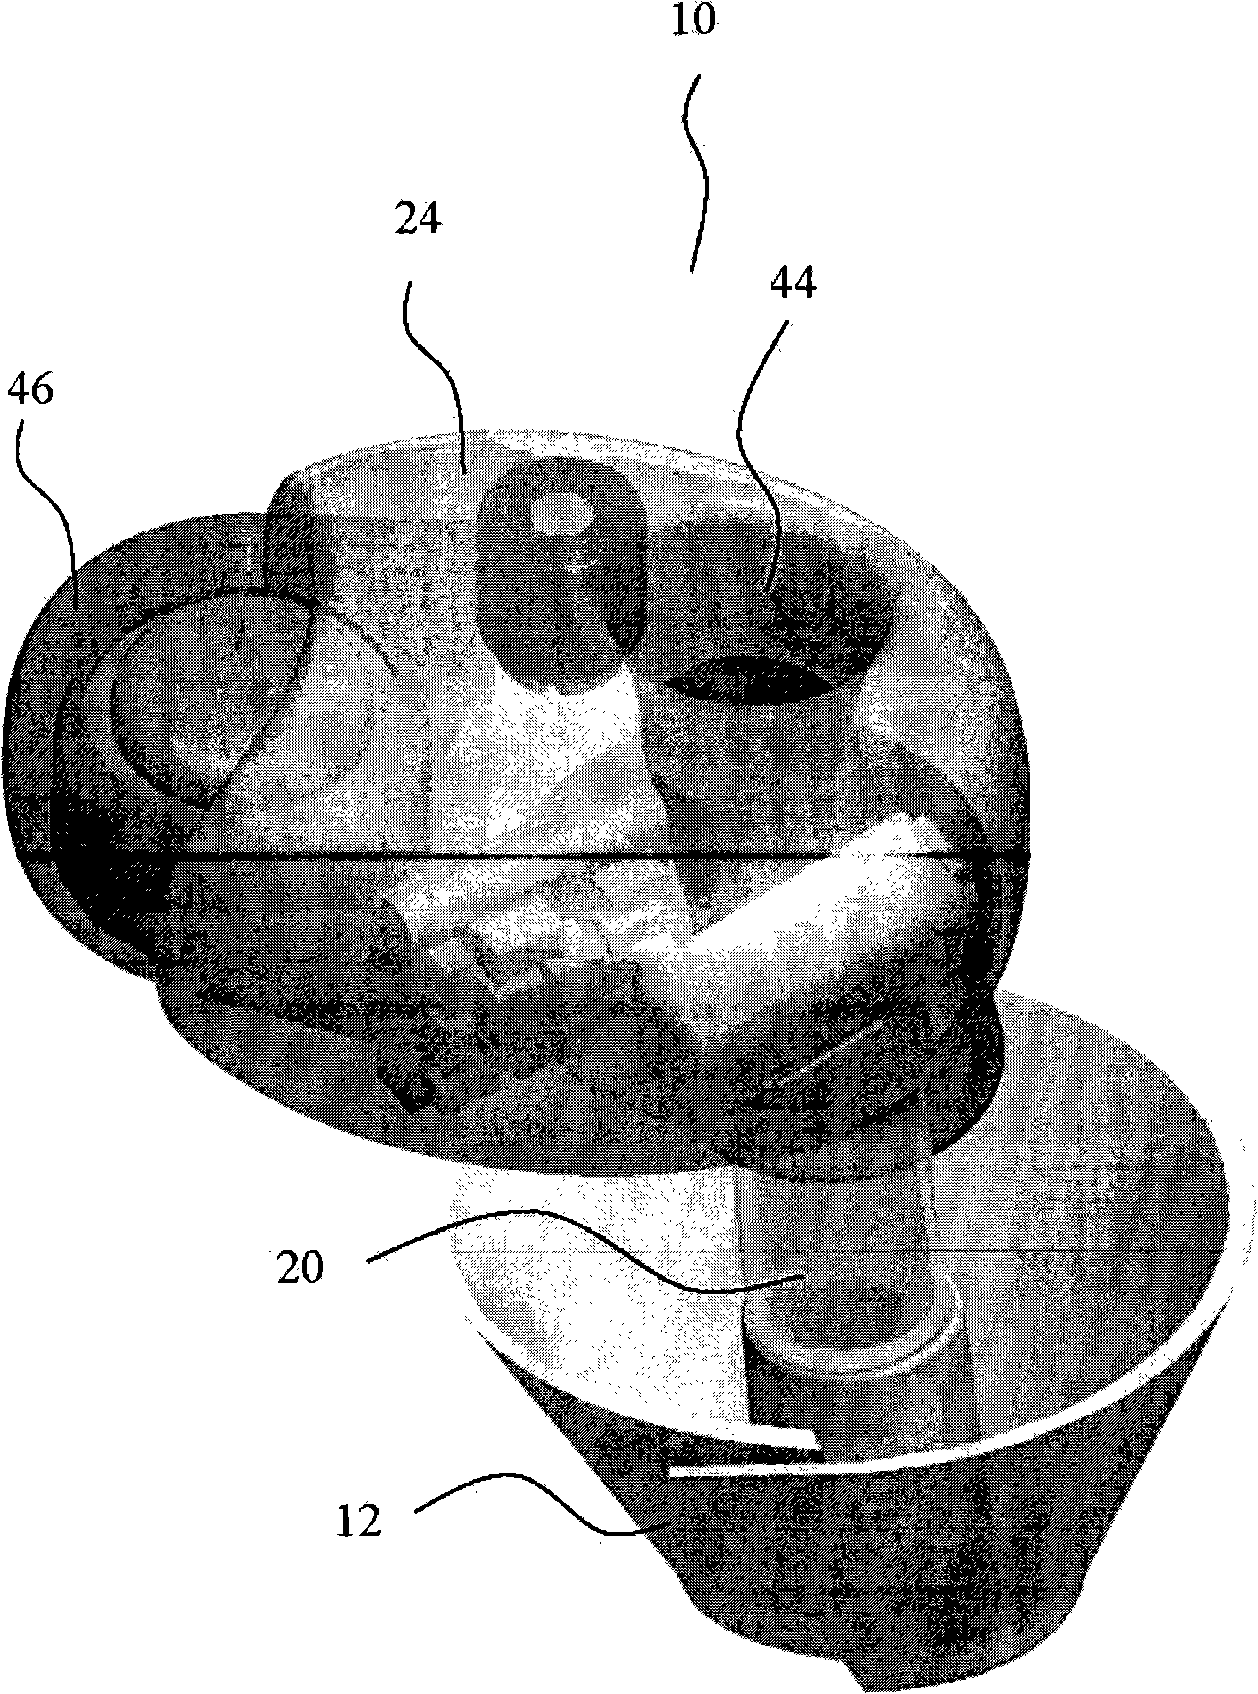 A hearing device with an open earpiece having a short vent